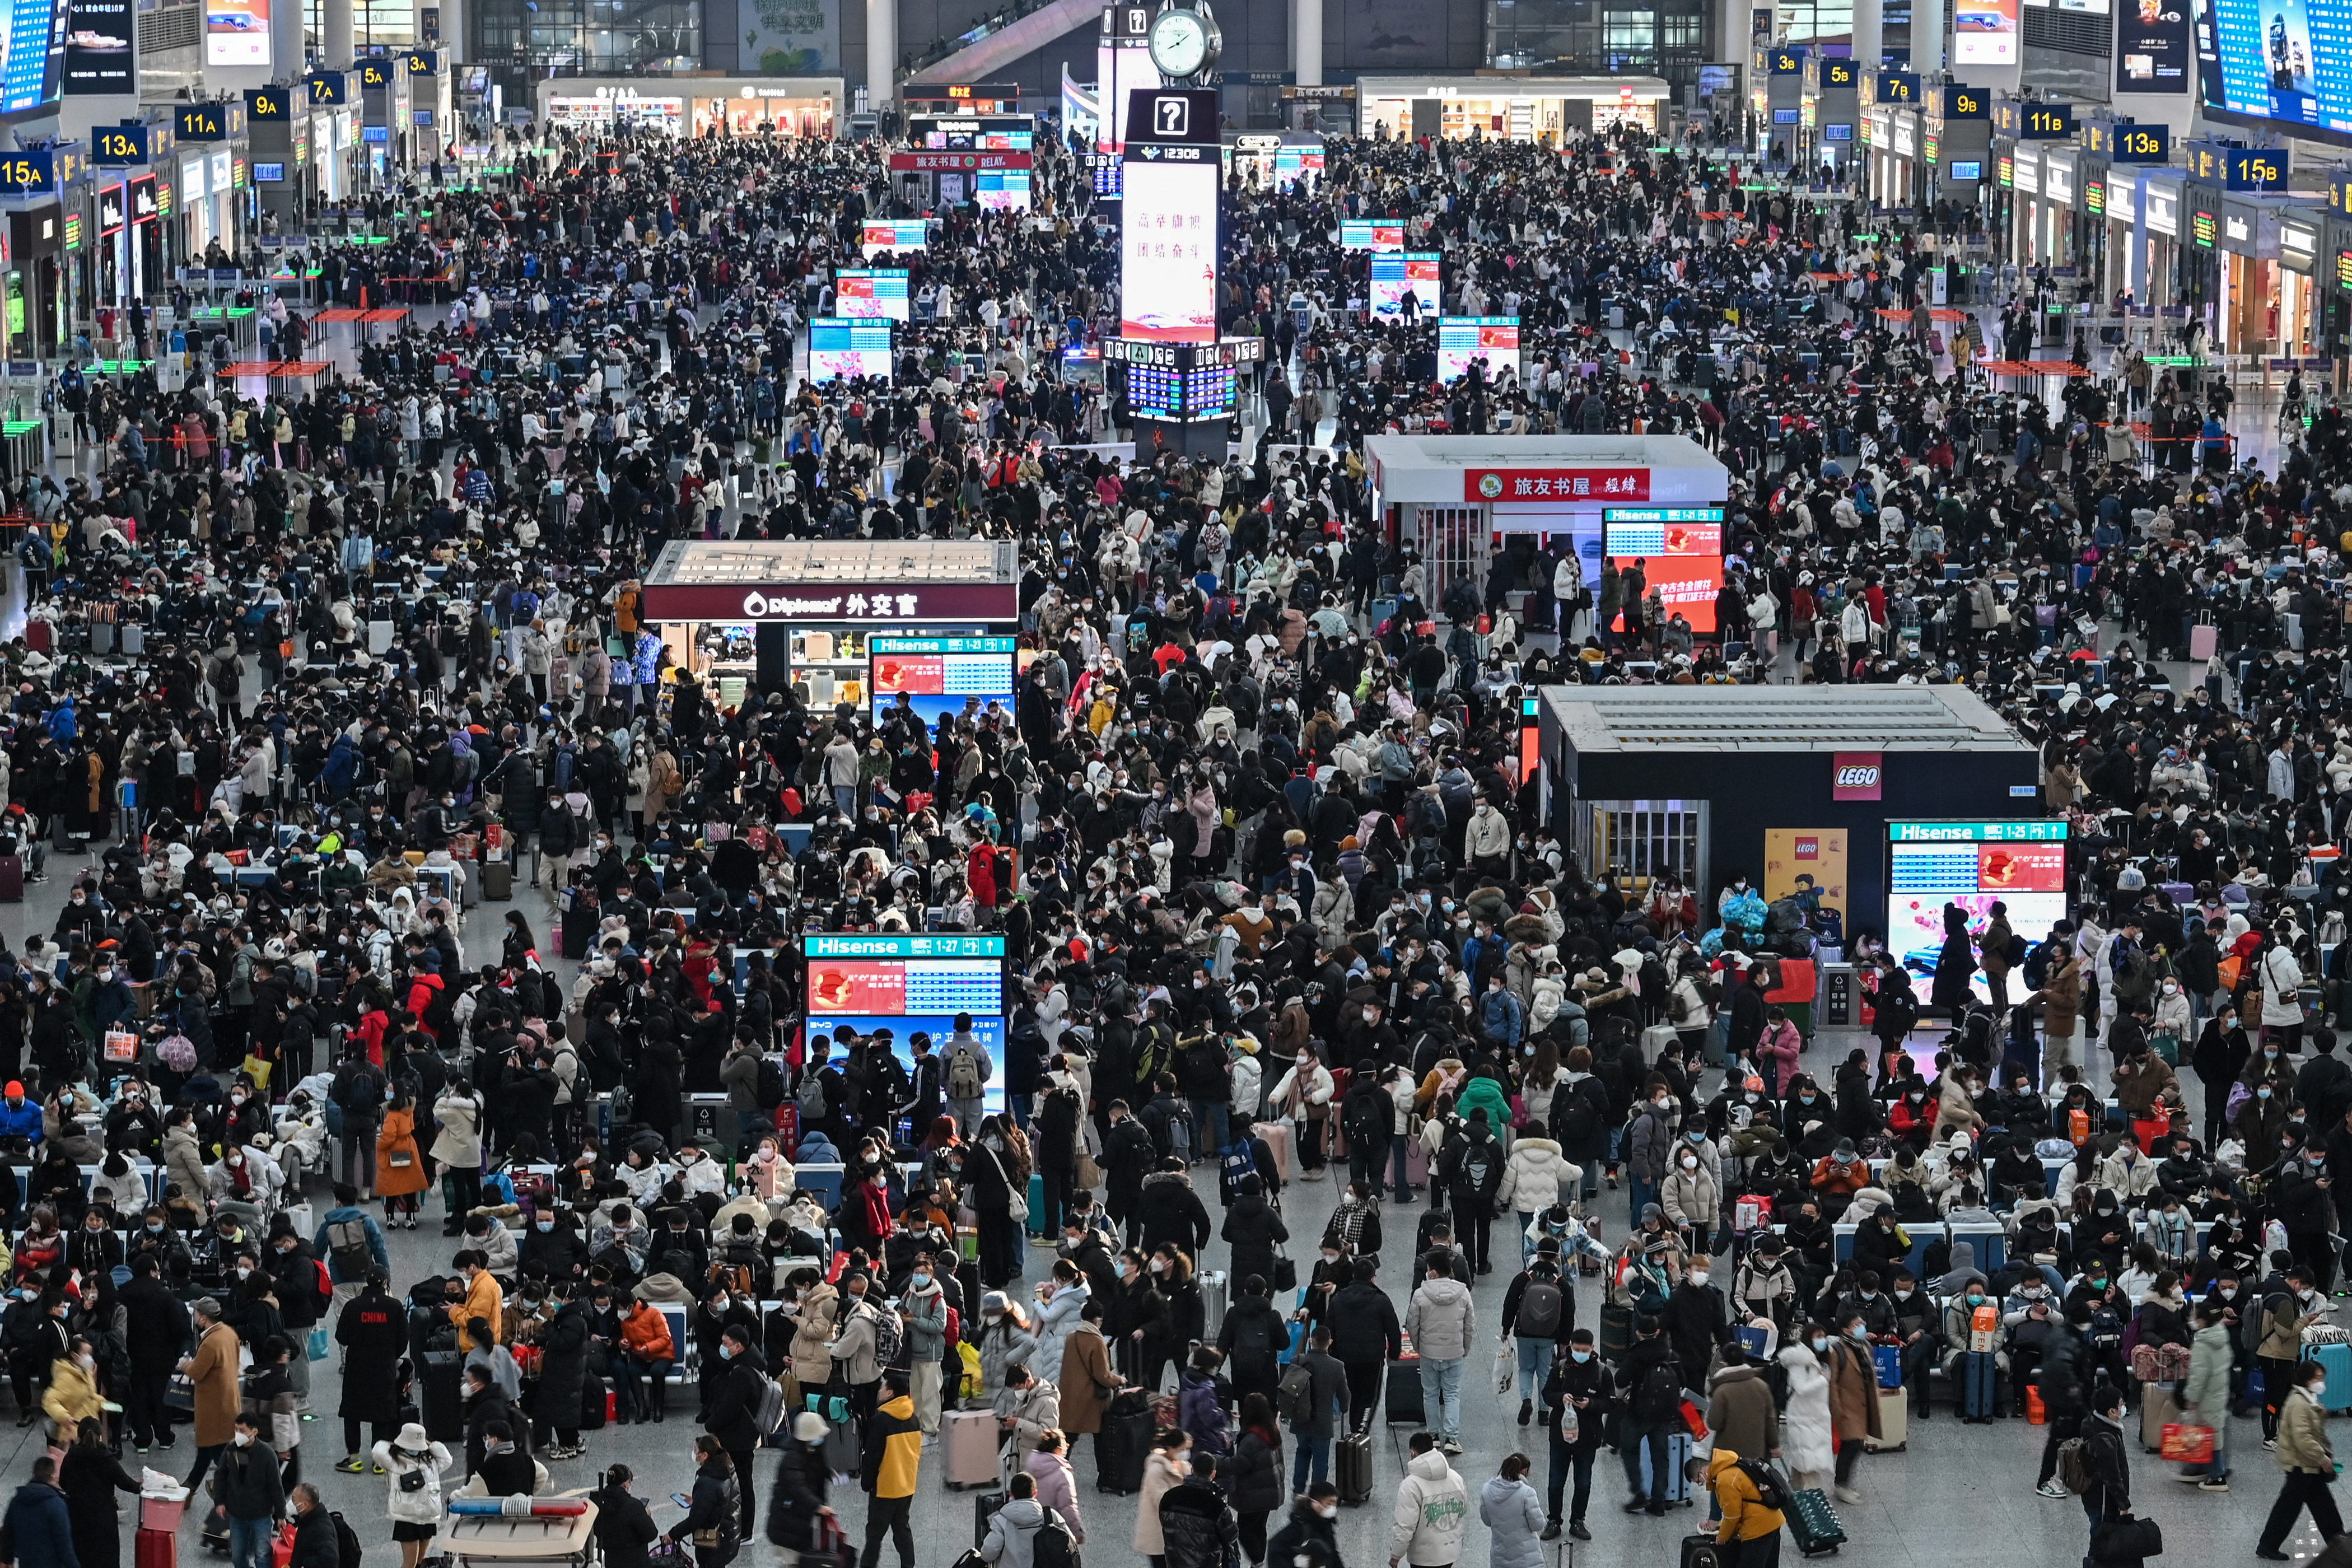 Passengers wait for their train at Hongqiao railway station in Shanghai on January 20, 2023, as annual migration begins with people heading back to their hometowns for Lunar New Year celebrations./Hector Retamal/AFP